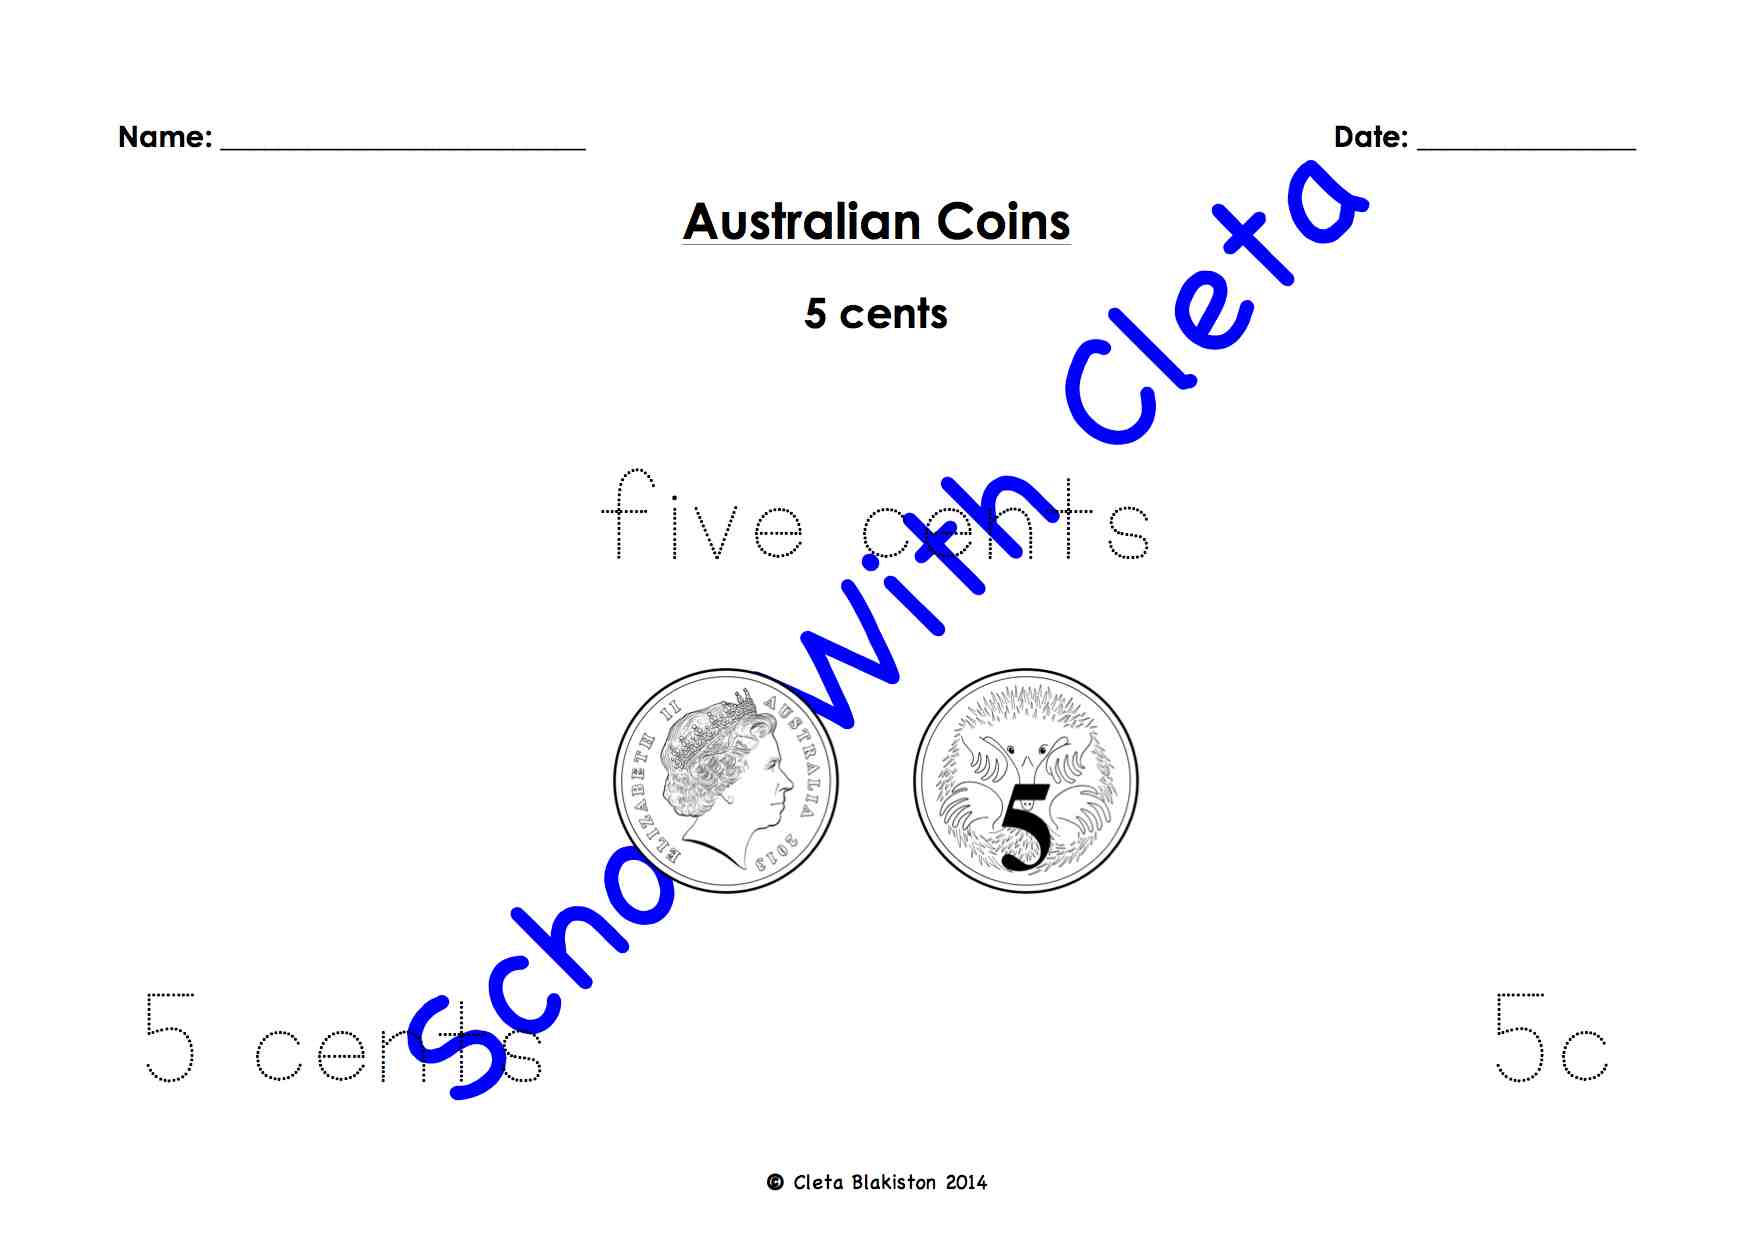 Australian Money: Their Coins' Images & Different Ways To Write Them